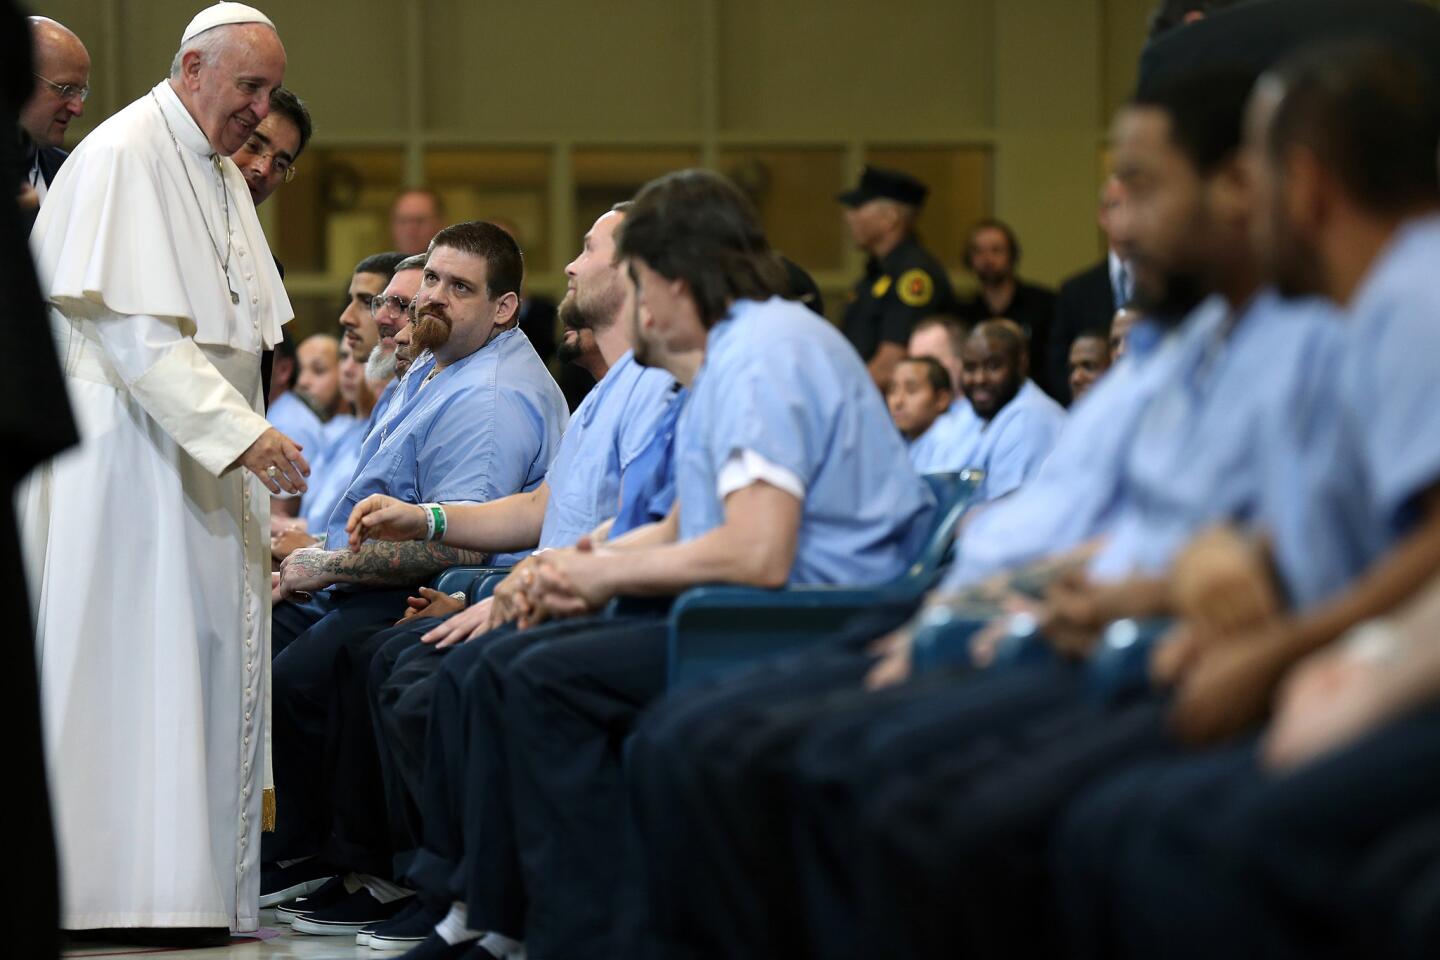 Pope Francis greets inmates during his visit to Curran Fromhold Correctional Facility in Philadelphia, Sunday, Sept. 27, 2015.